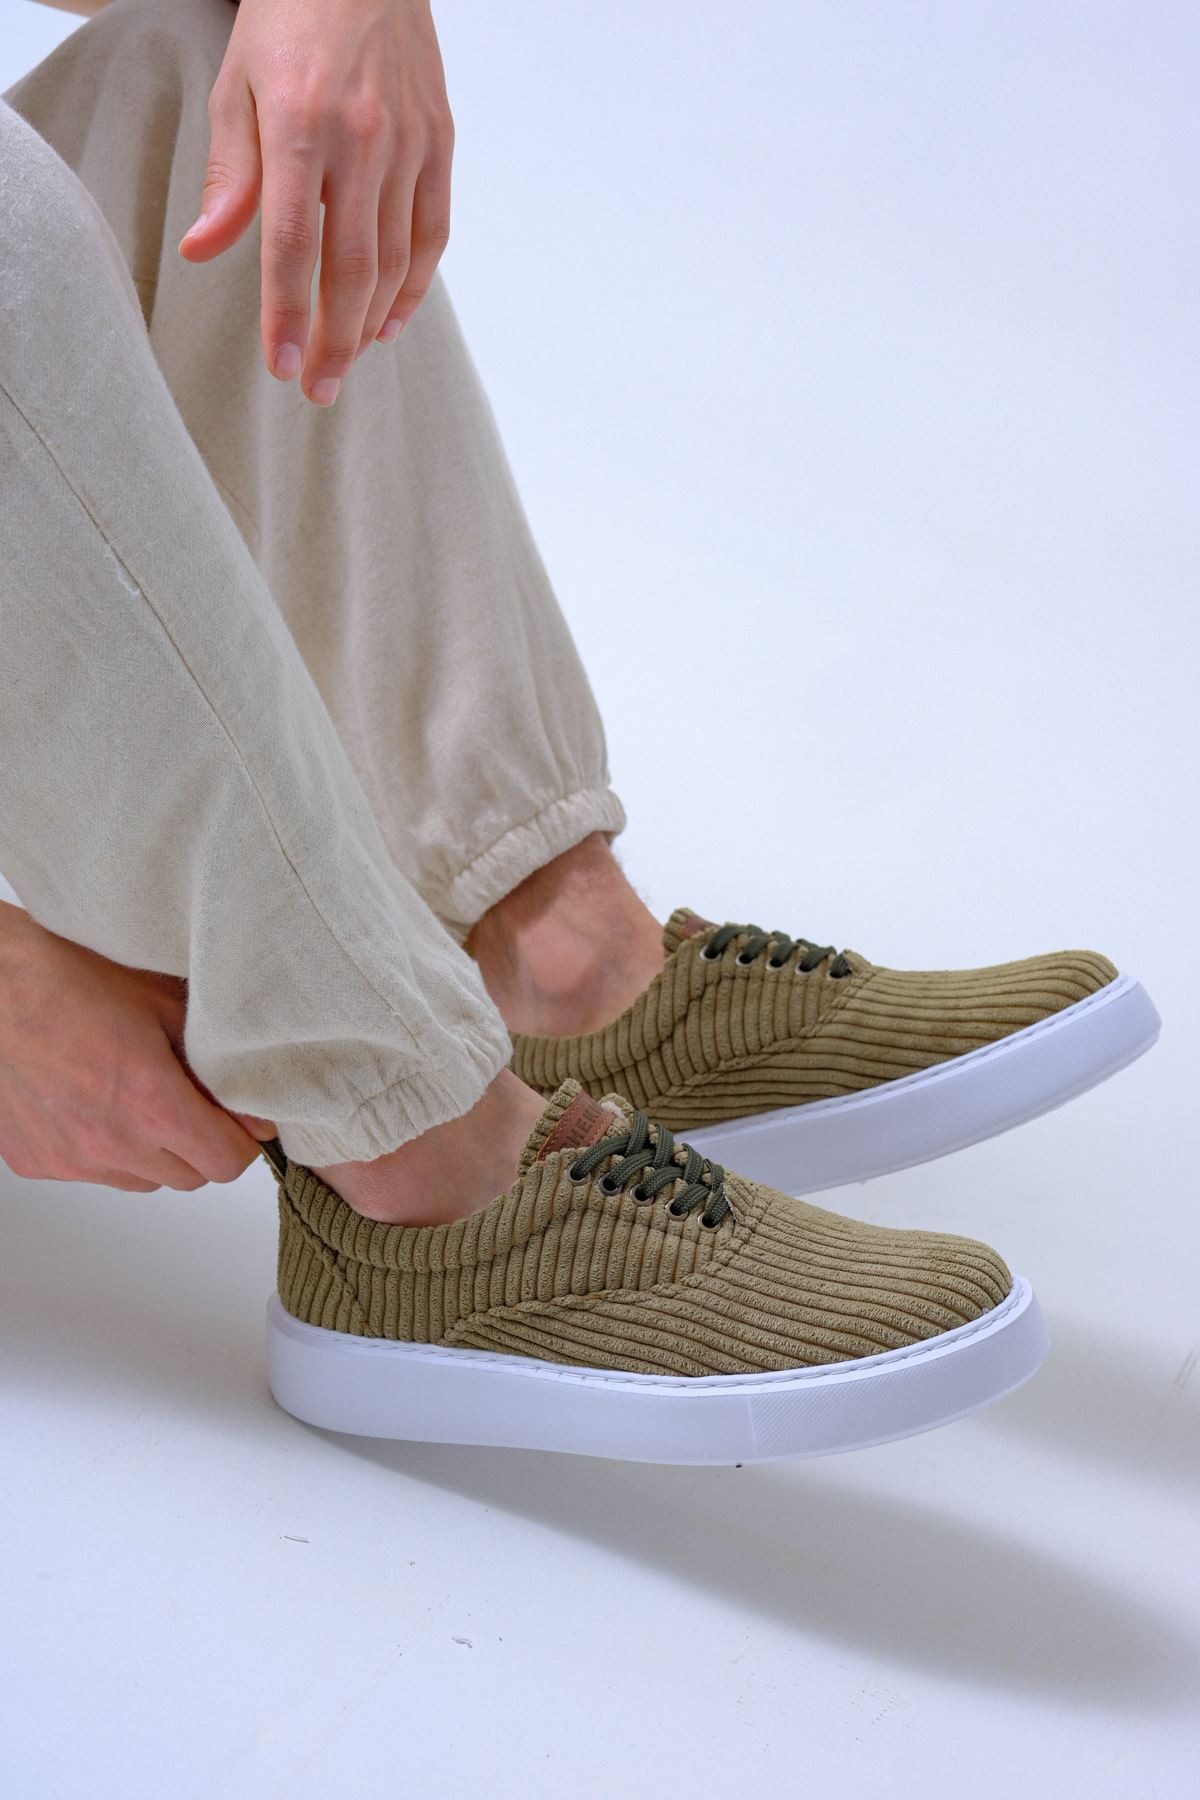 Chekich Men's Shoes Khaki Color Lace-Up Closure Knit Fabric Material Stitched Sole Flexible Lightweight Casual Sneakers CH173 BT